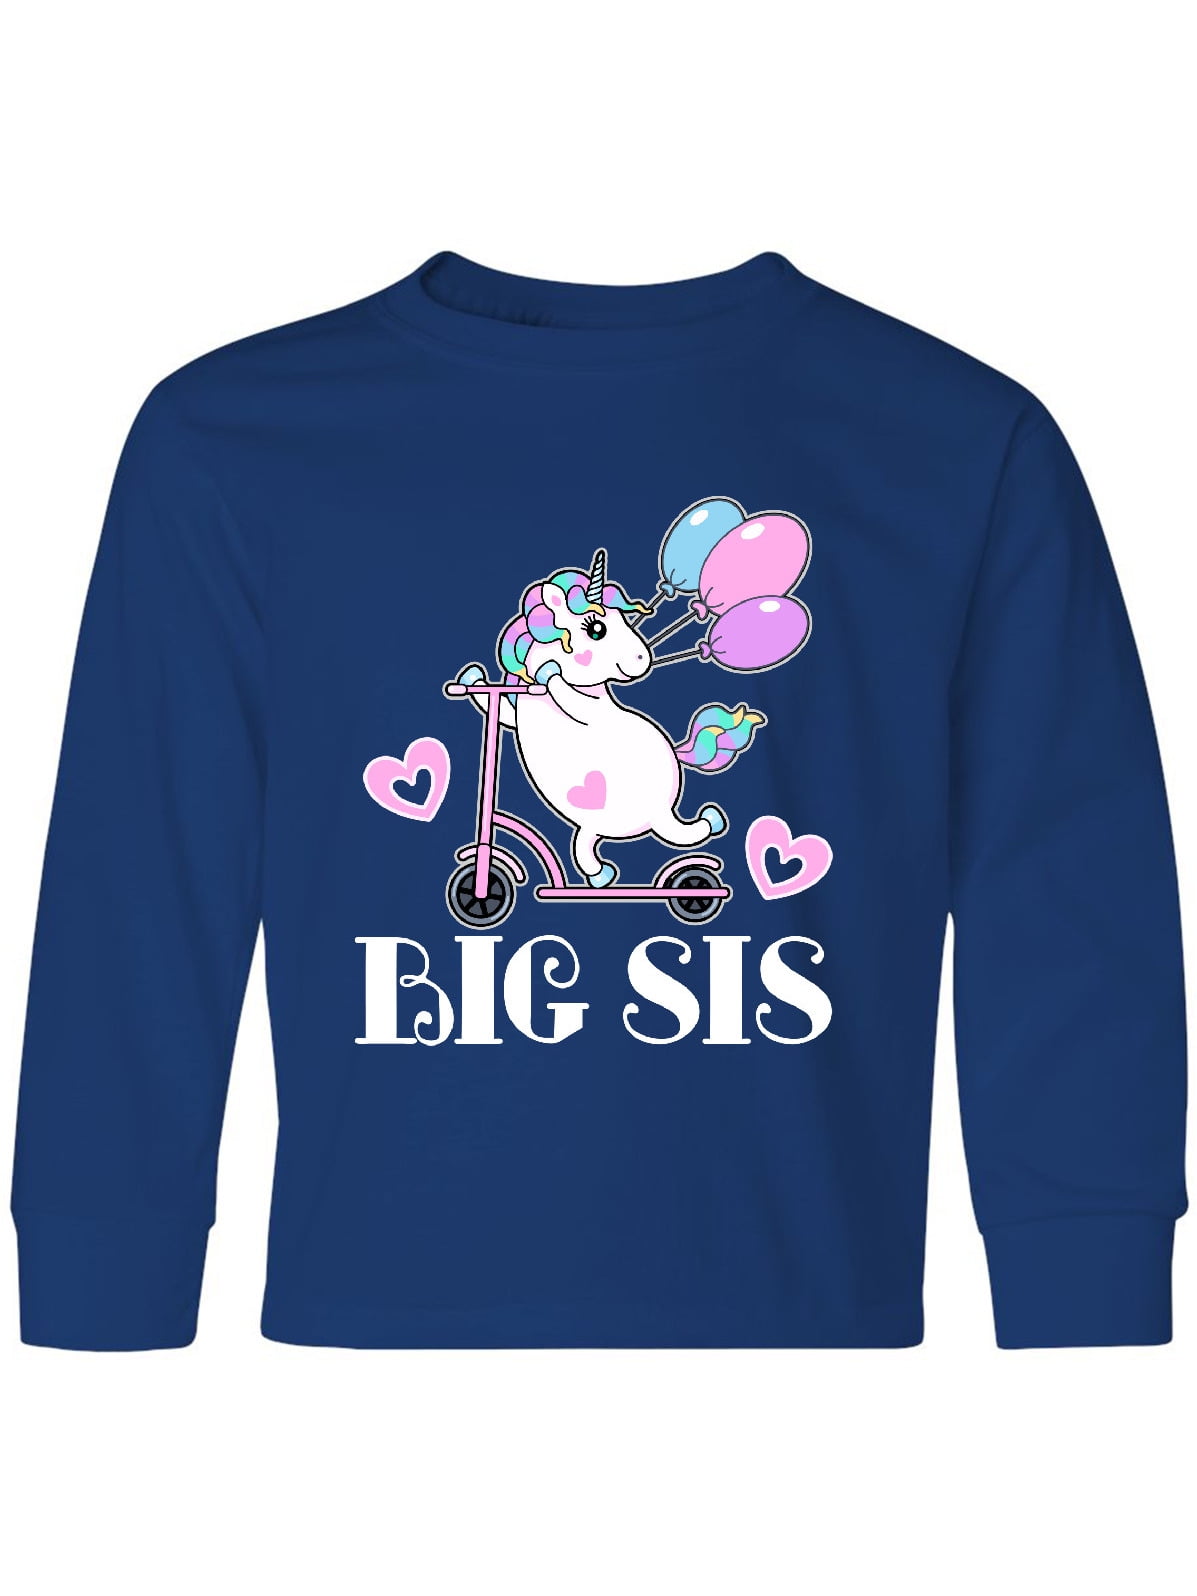 Unicorn Shirts for Girls Lil Sis Shirts Gifts for Little Sister Lil Sis Youth Shirt with Unicorns Print Baby Announcement. Kids T-Shirt